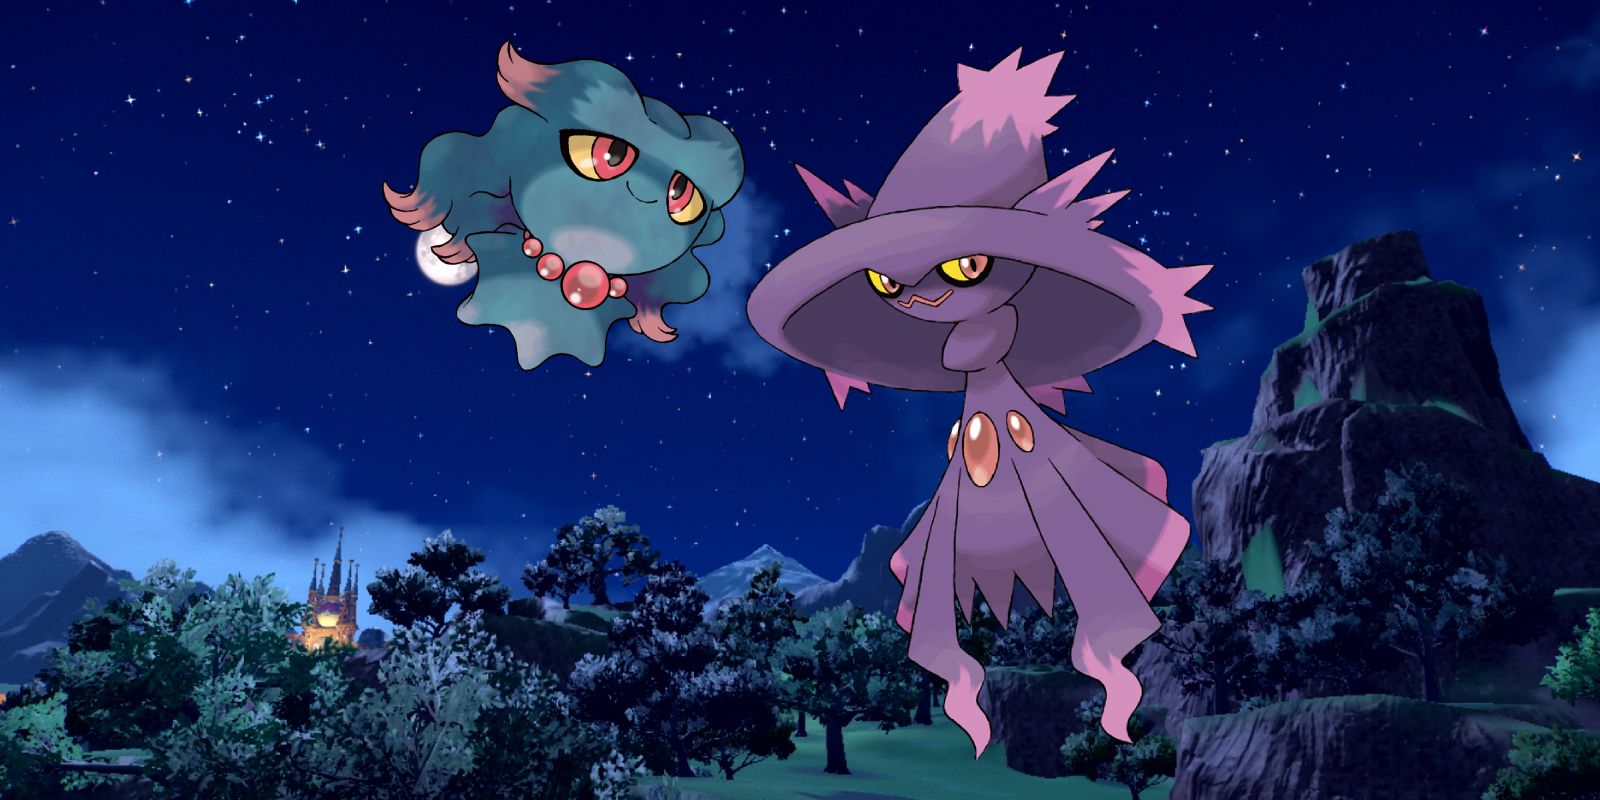 Artwork of Misdreavus and Mismagius superimposed over a Pokémon Scarlet and Violet nighttime landscape, with a mountain to one side, and a building illuminated in the dark to the other.